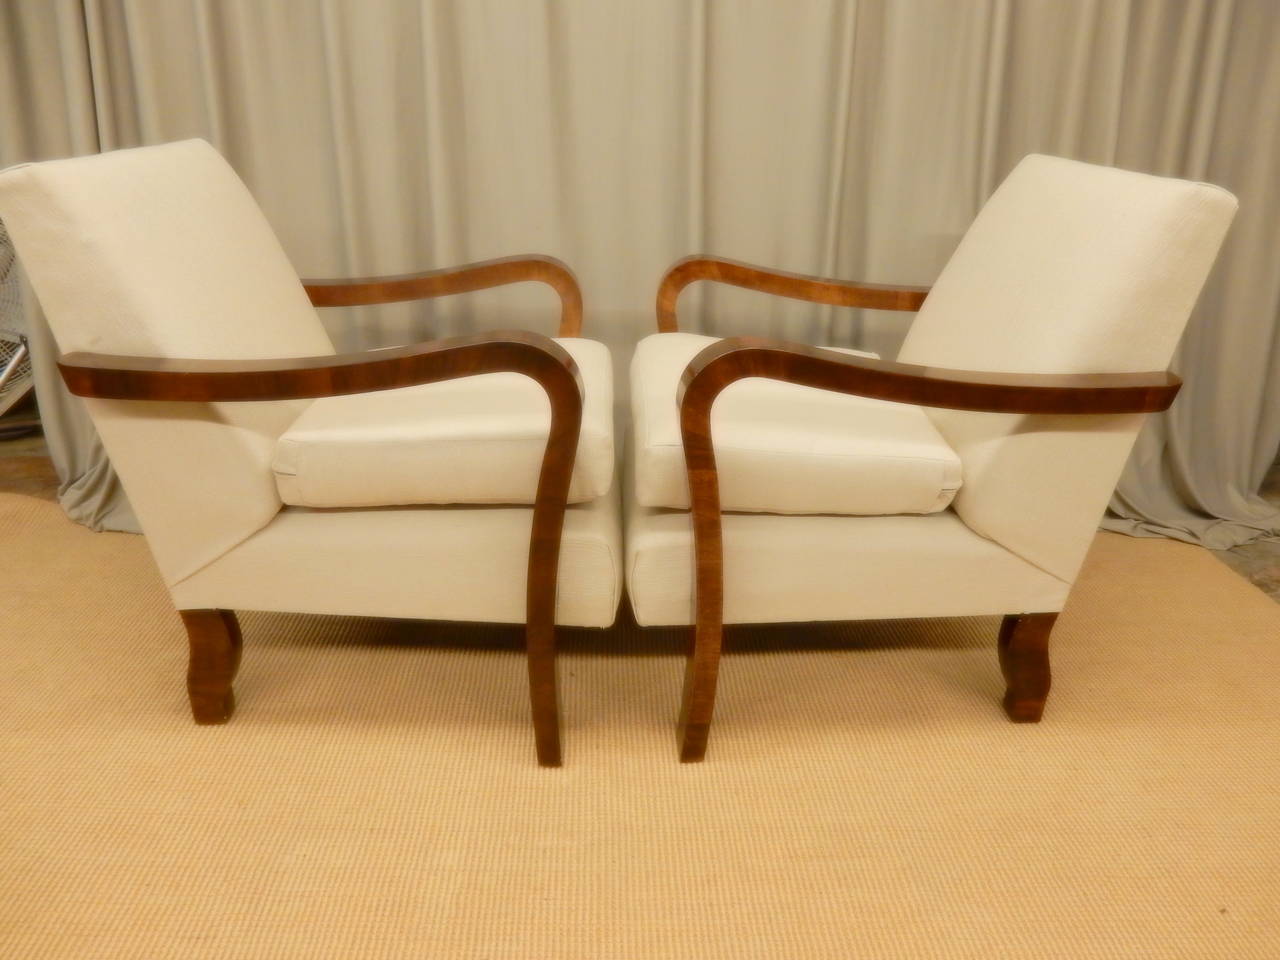 Pair of restored French Art Deco walnut armchairs. New fabric and upholstery.